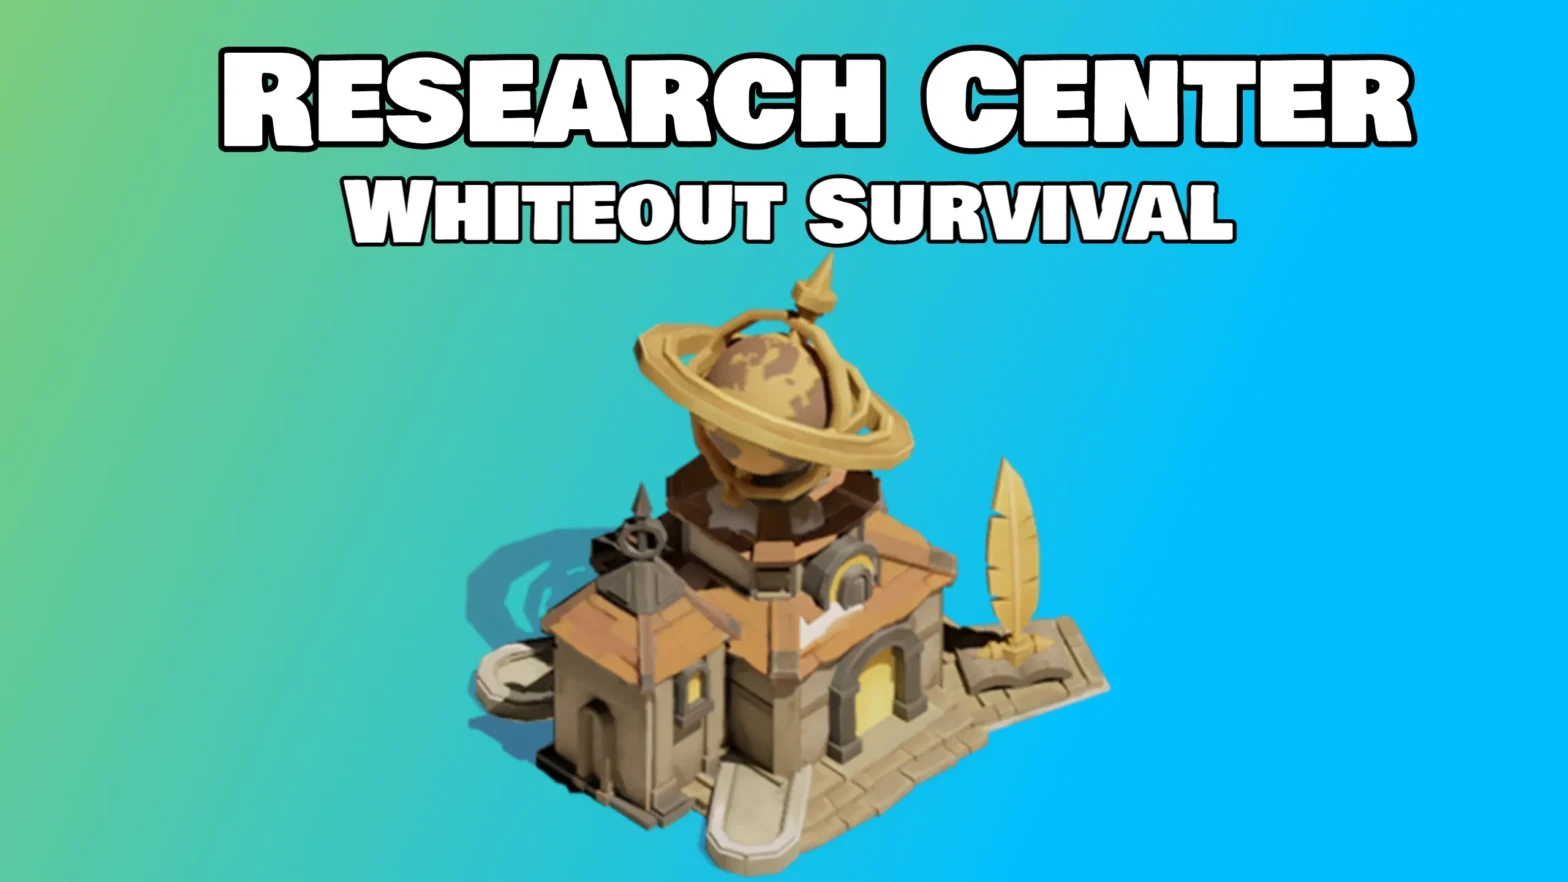 Whiteout Survival: Research Center